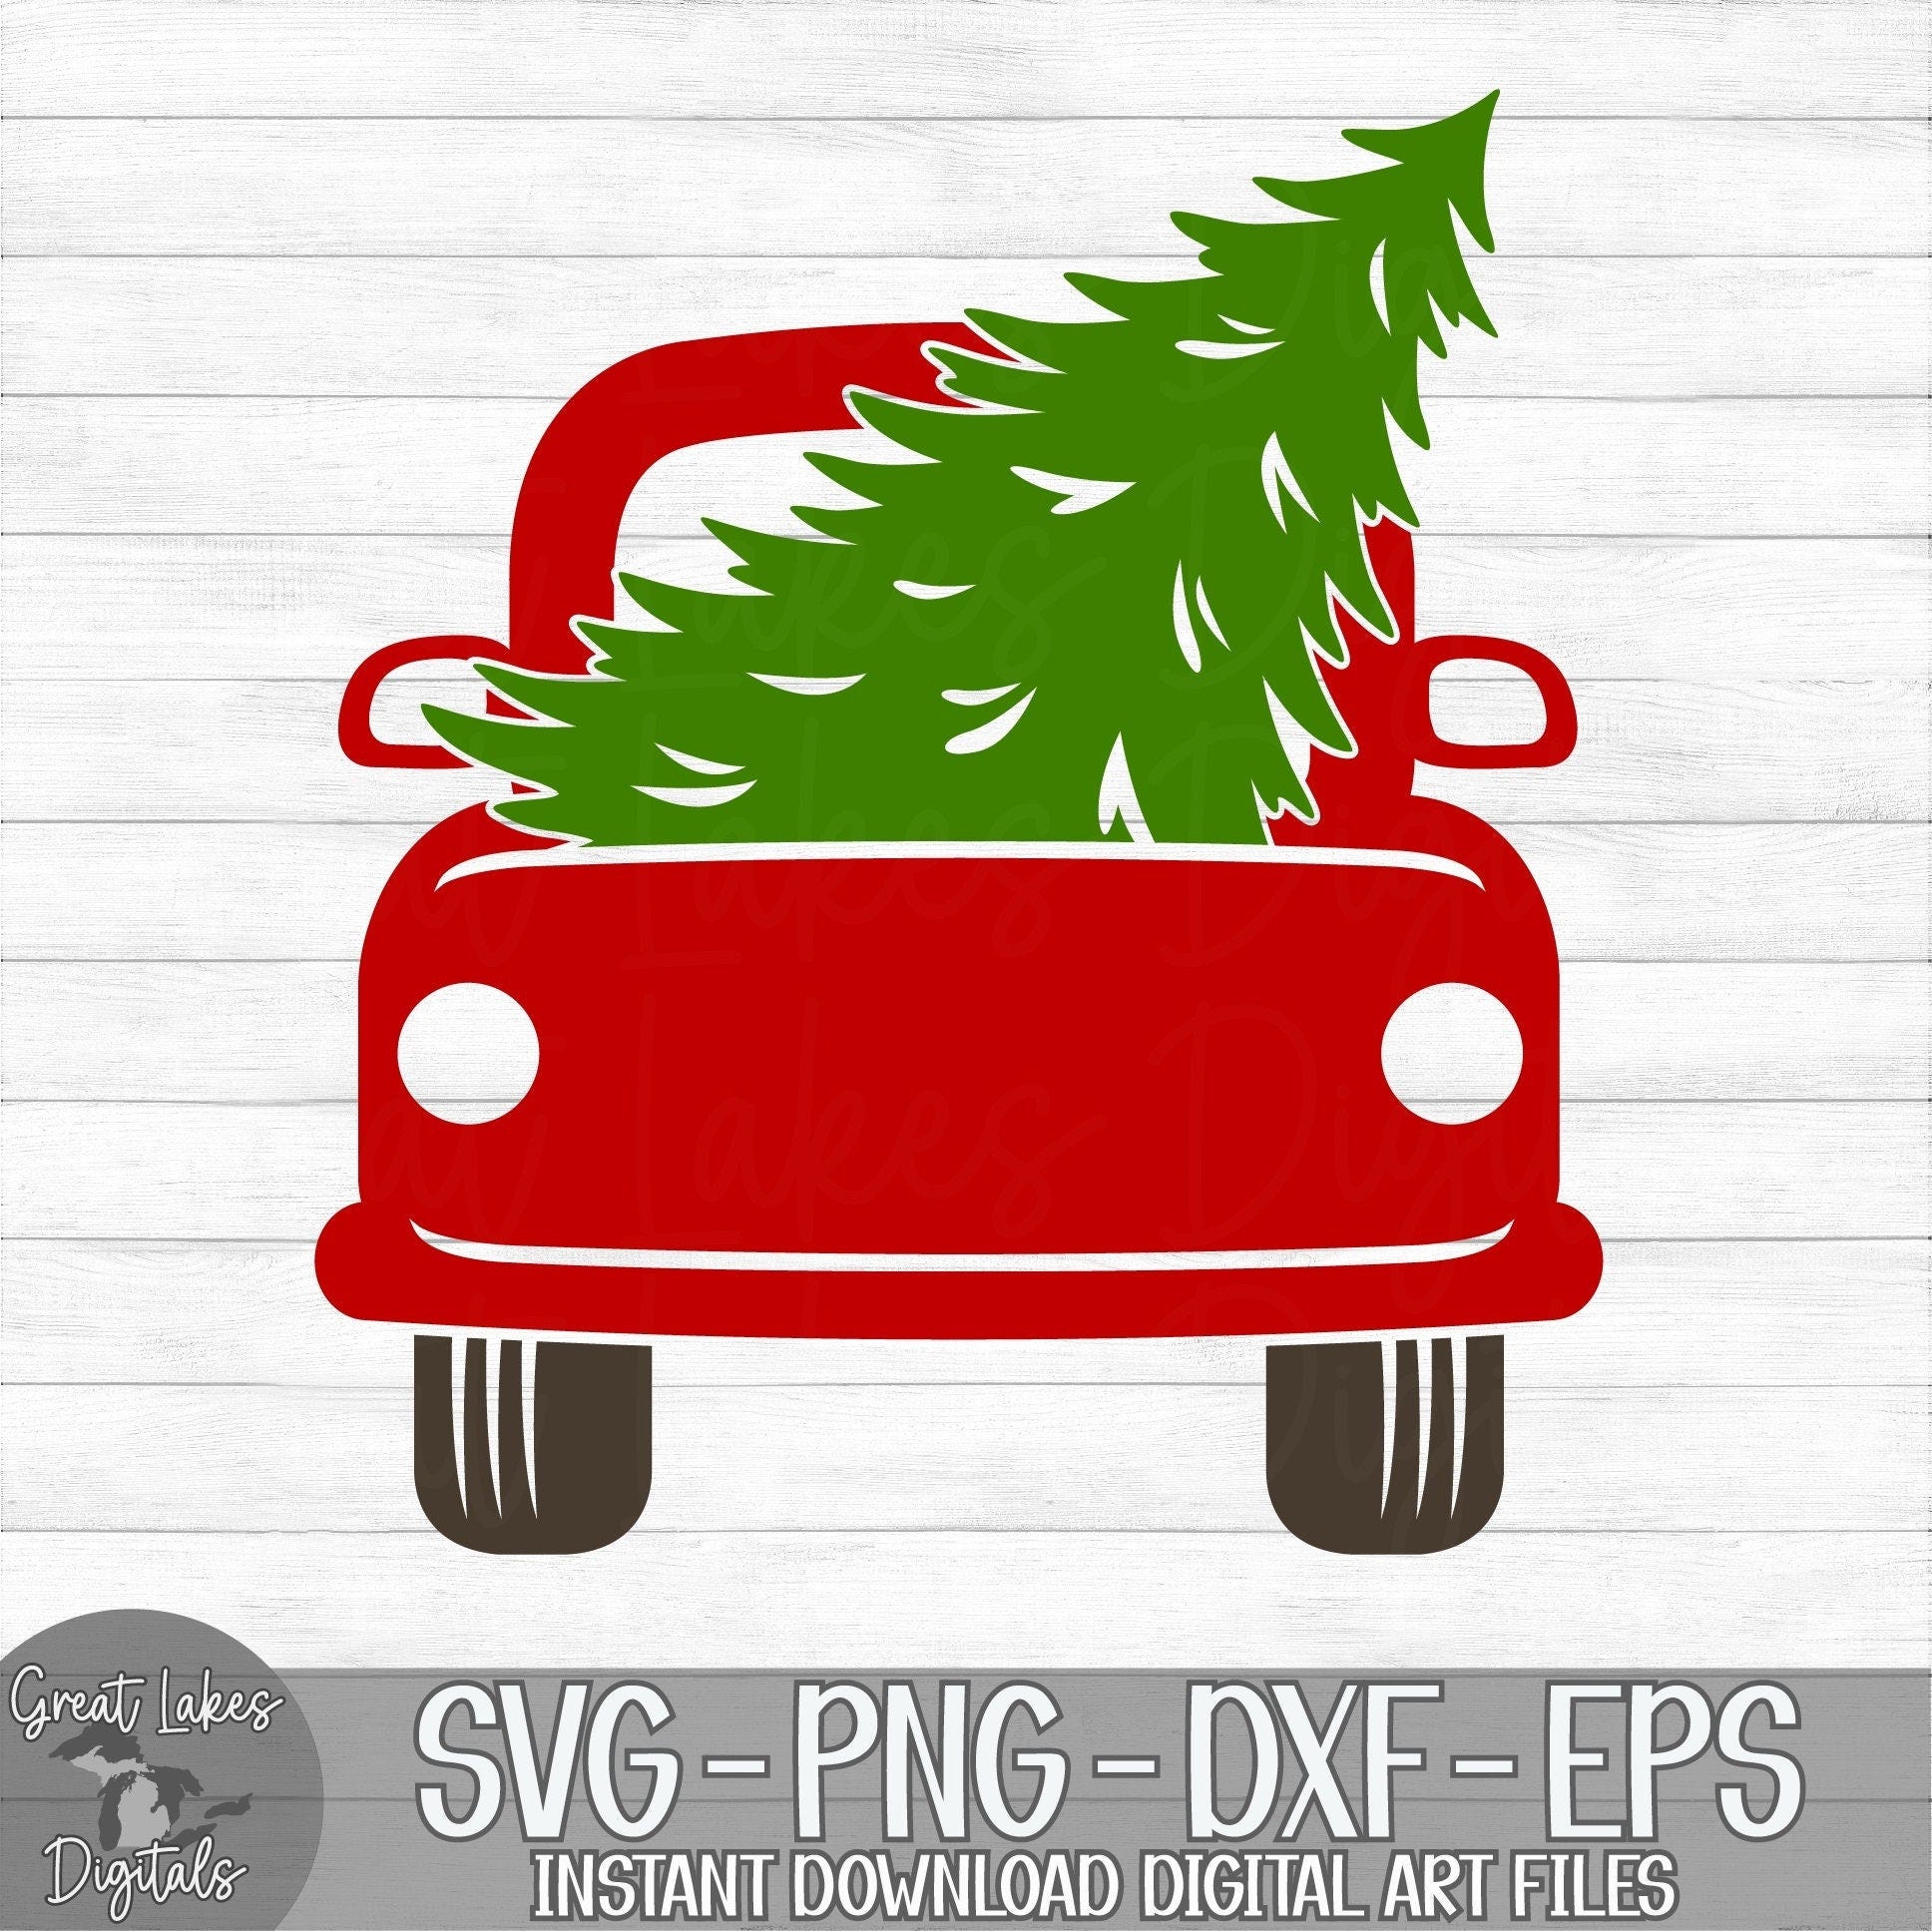 Christmas Truck & Tree - Instant Digital Download - svg, png, dxf, and eps files included! Back of Truck, Christmas Tree